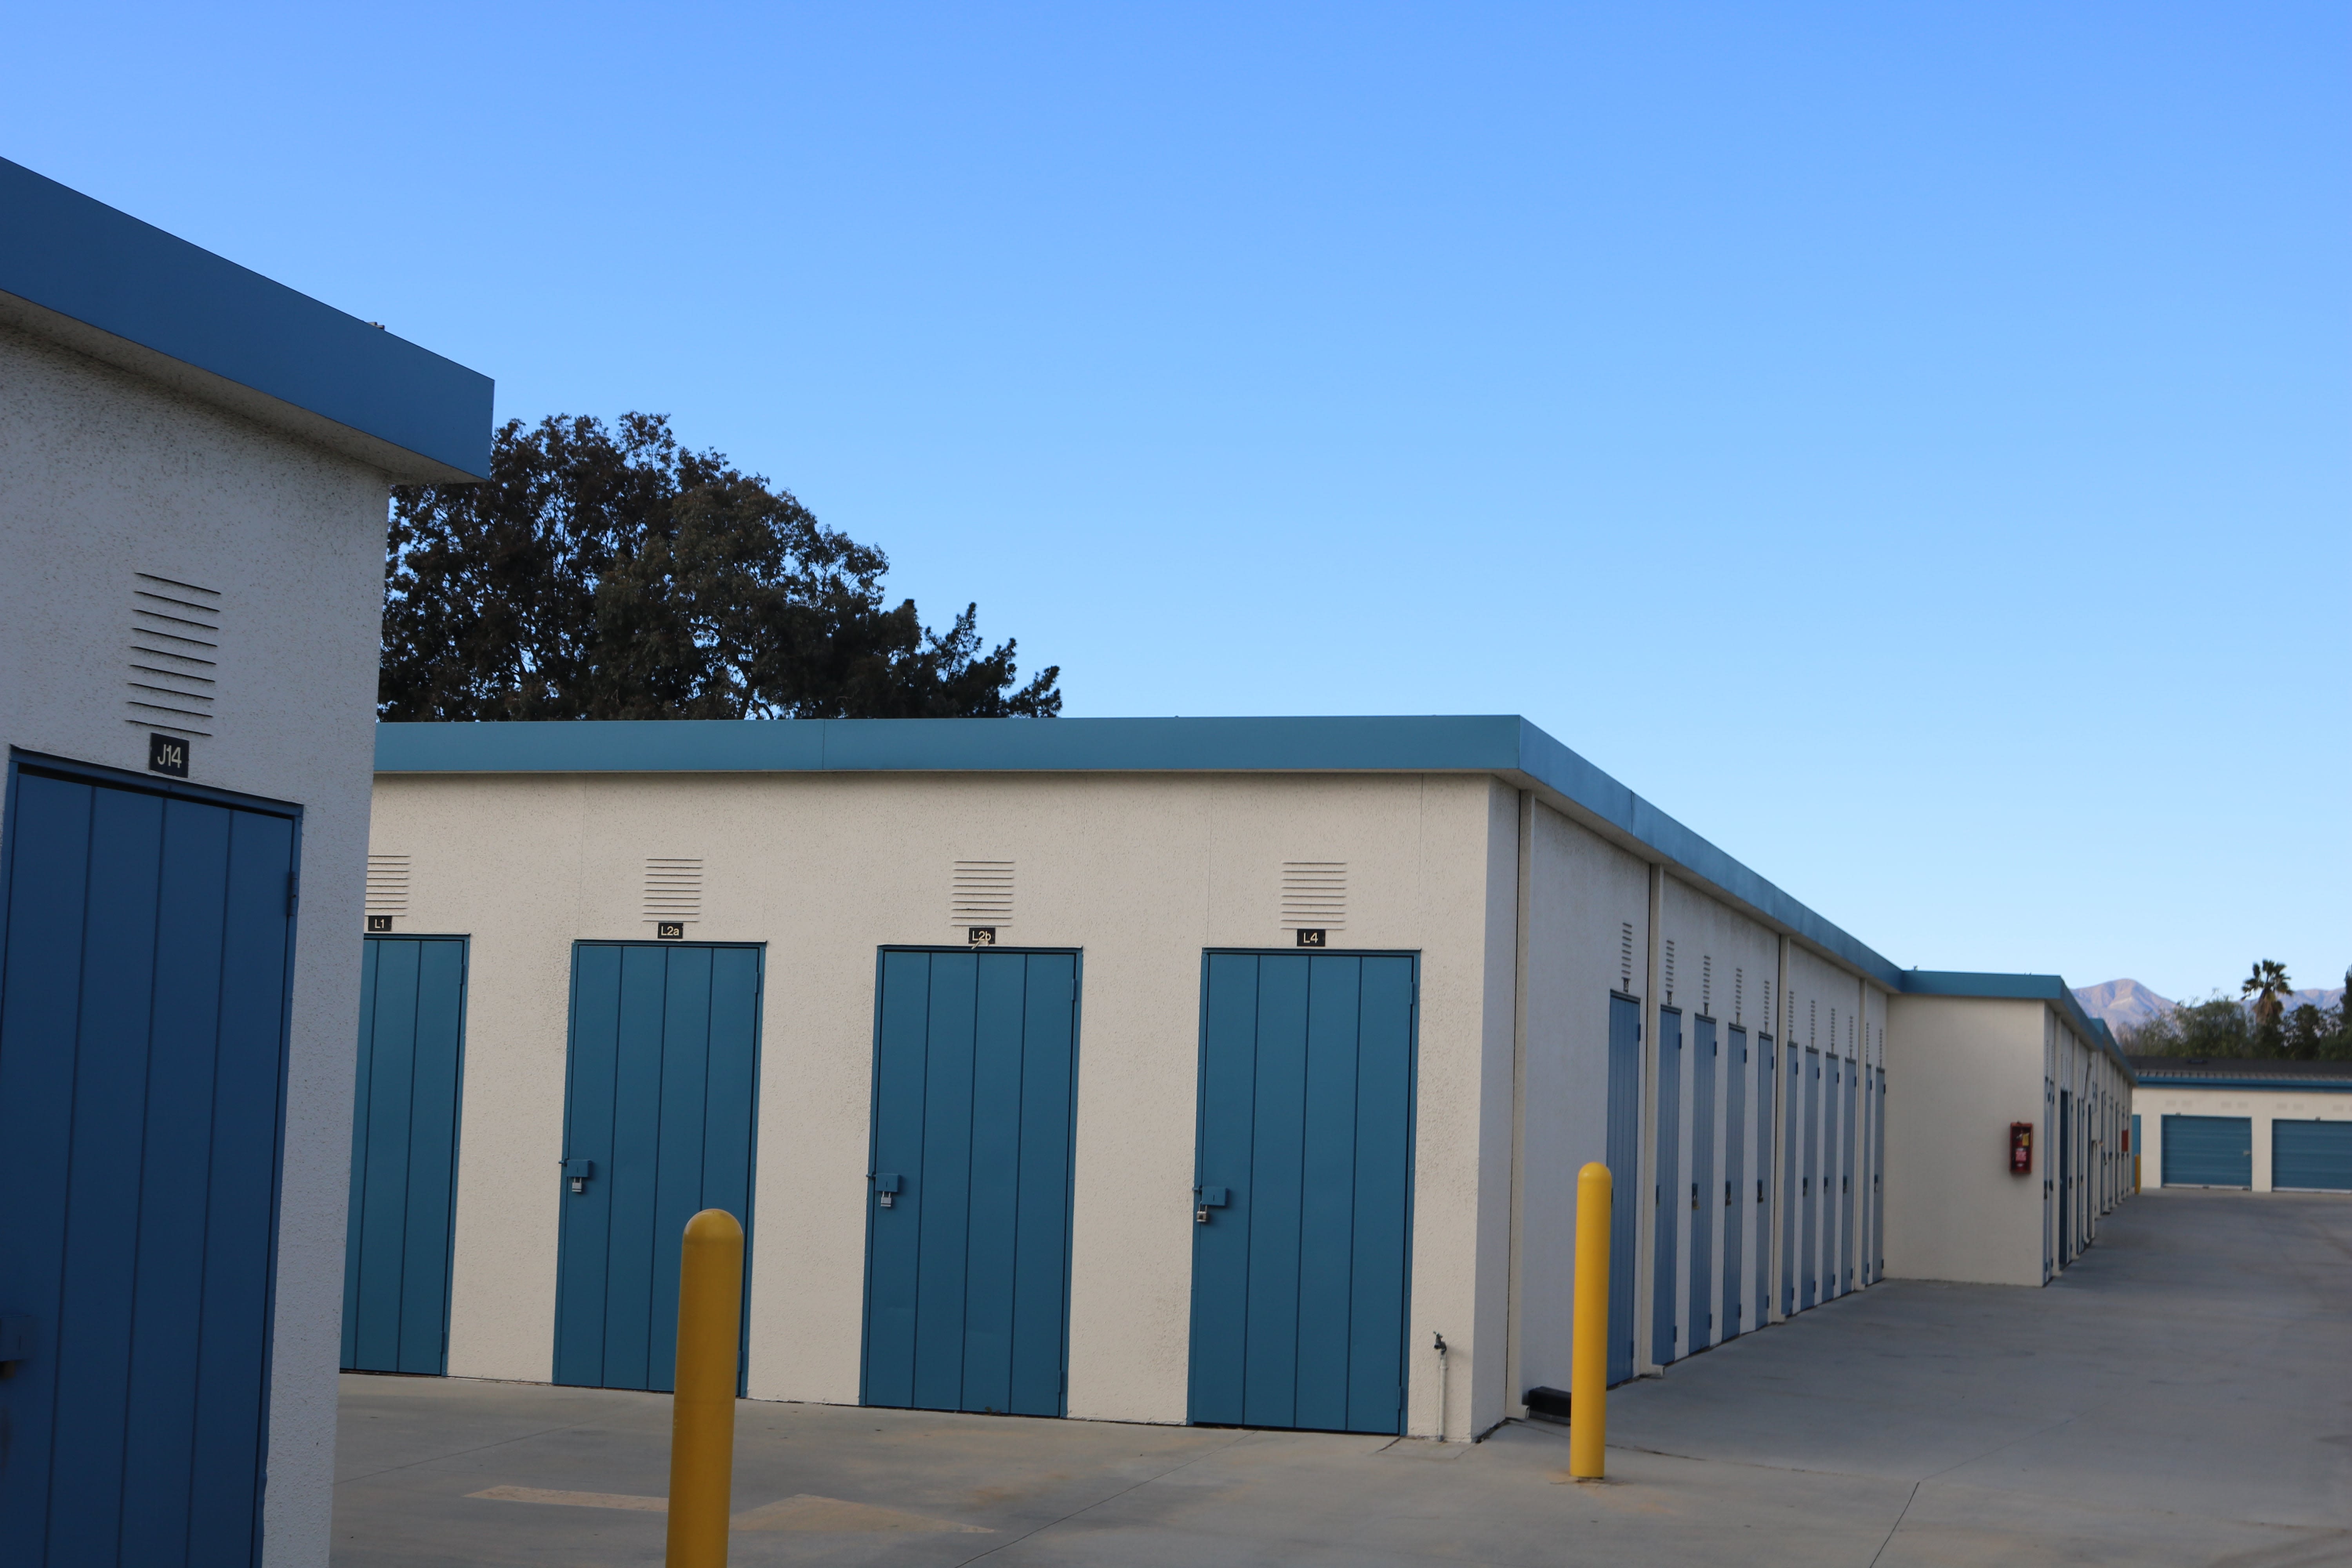 The large storage area at Golden State Storage - Roscoe in North Hills, California